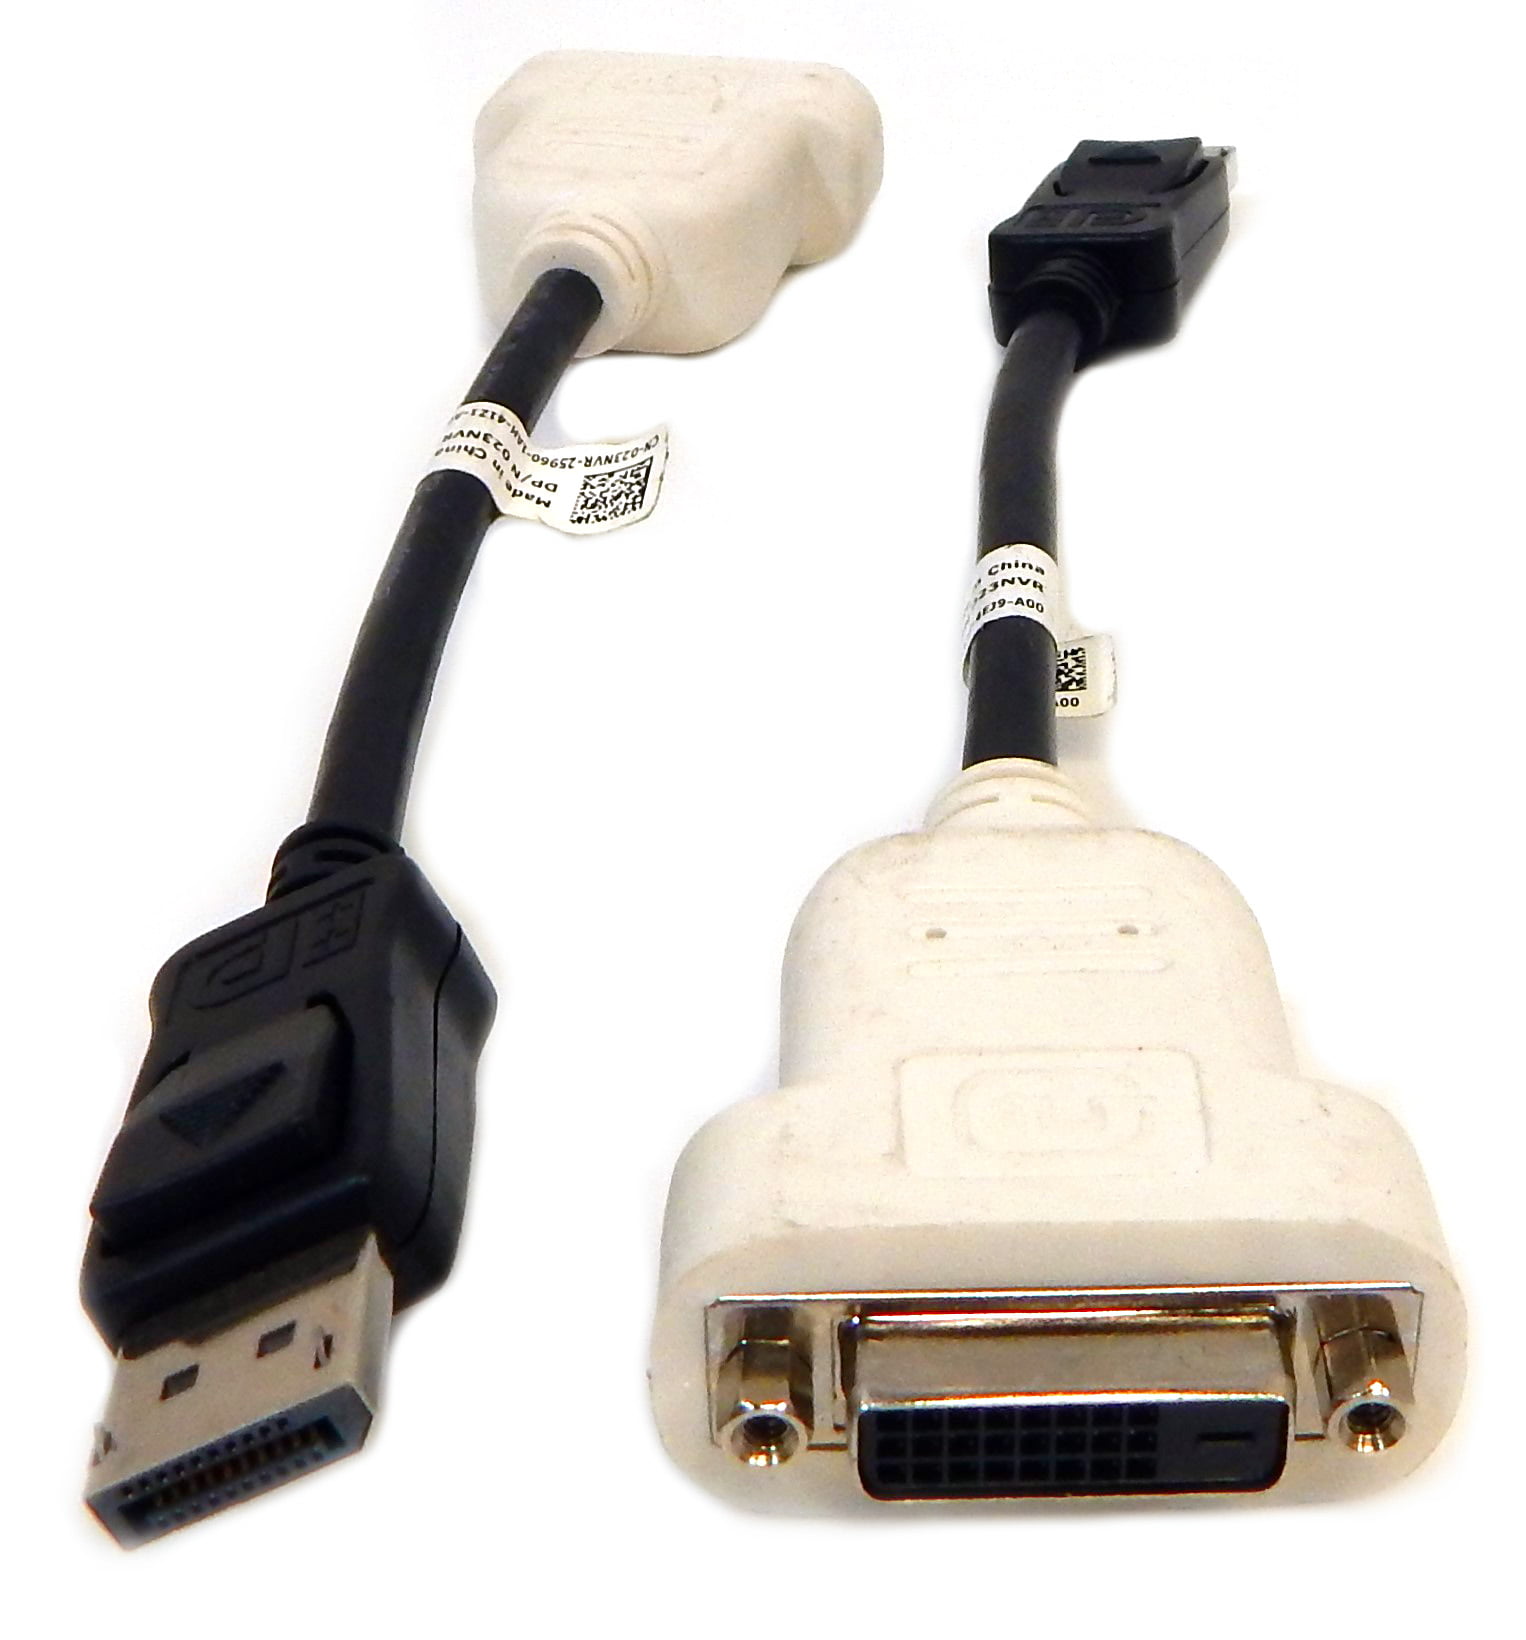 Dell Display Port To DVI Video Dongle Adapter Cable DANARBC084 KKMYD 